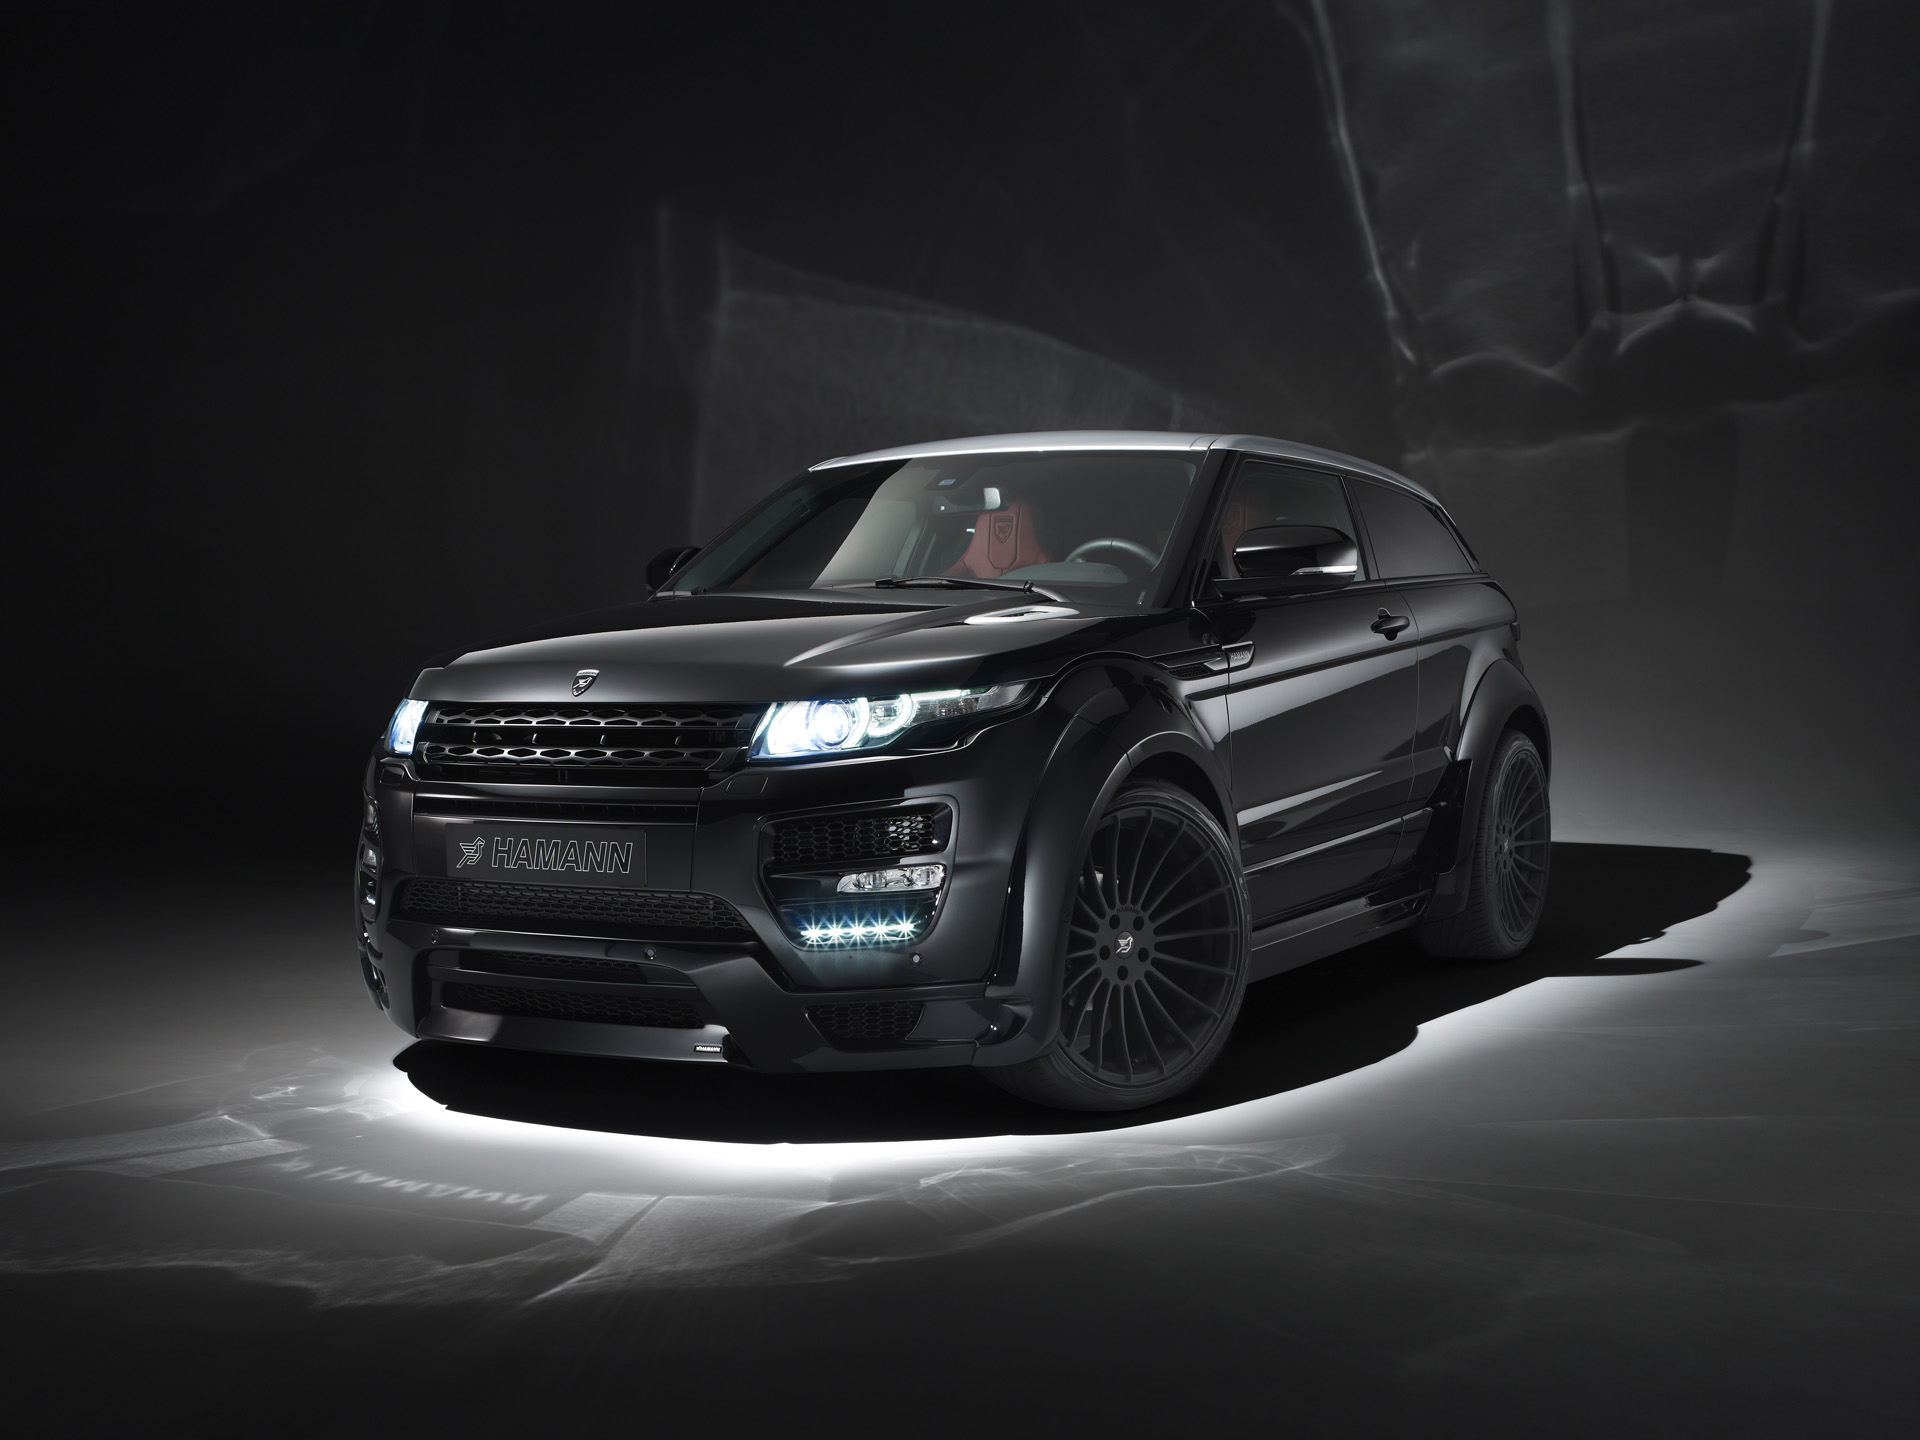 HD Range Rover Wallpaper Background Image For